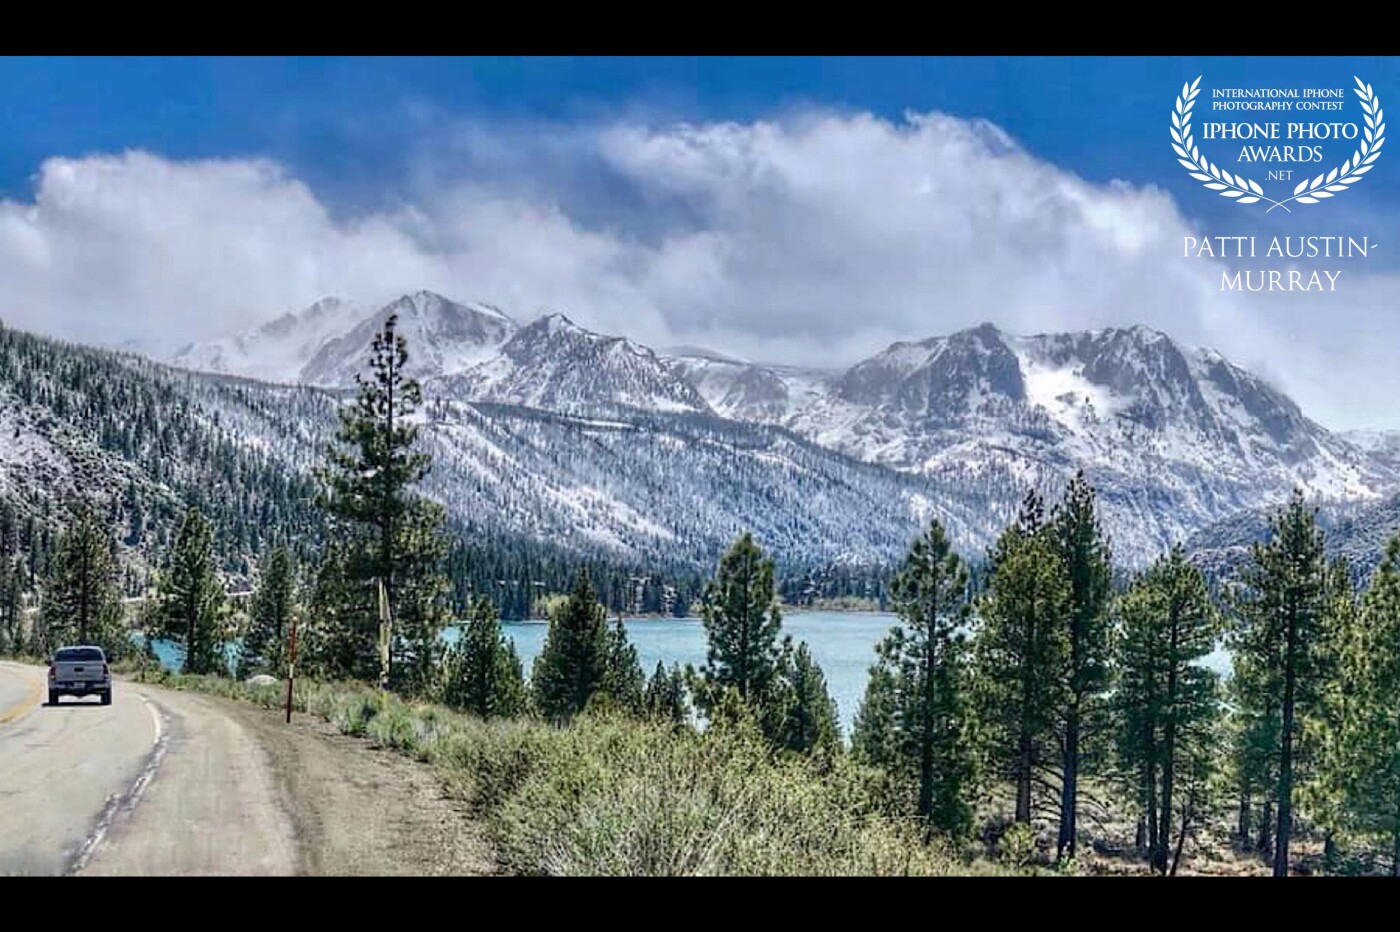 May in the Eastern Sierra on the June Lake Loop,  California, just off the 395. Had been snowing and the wind gusts were close to 100mph on the high peaks, with more weather coming in. 